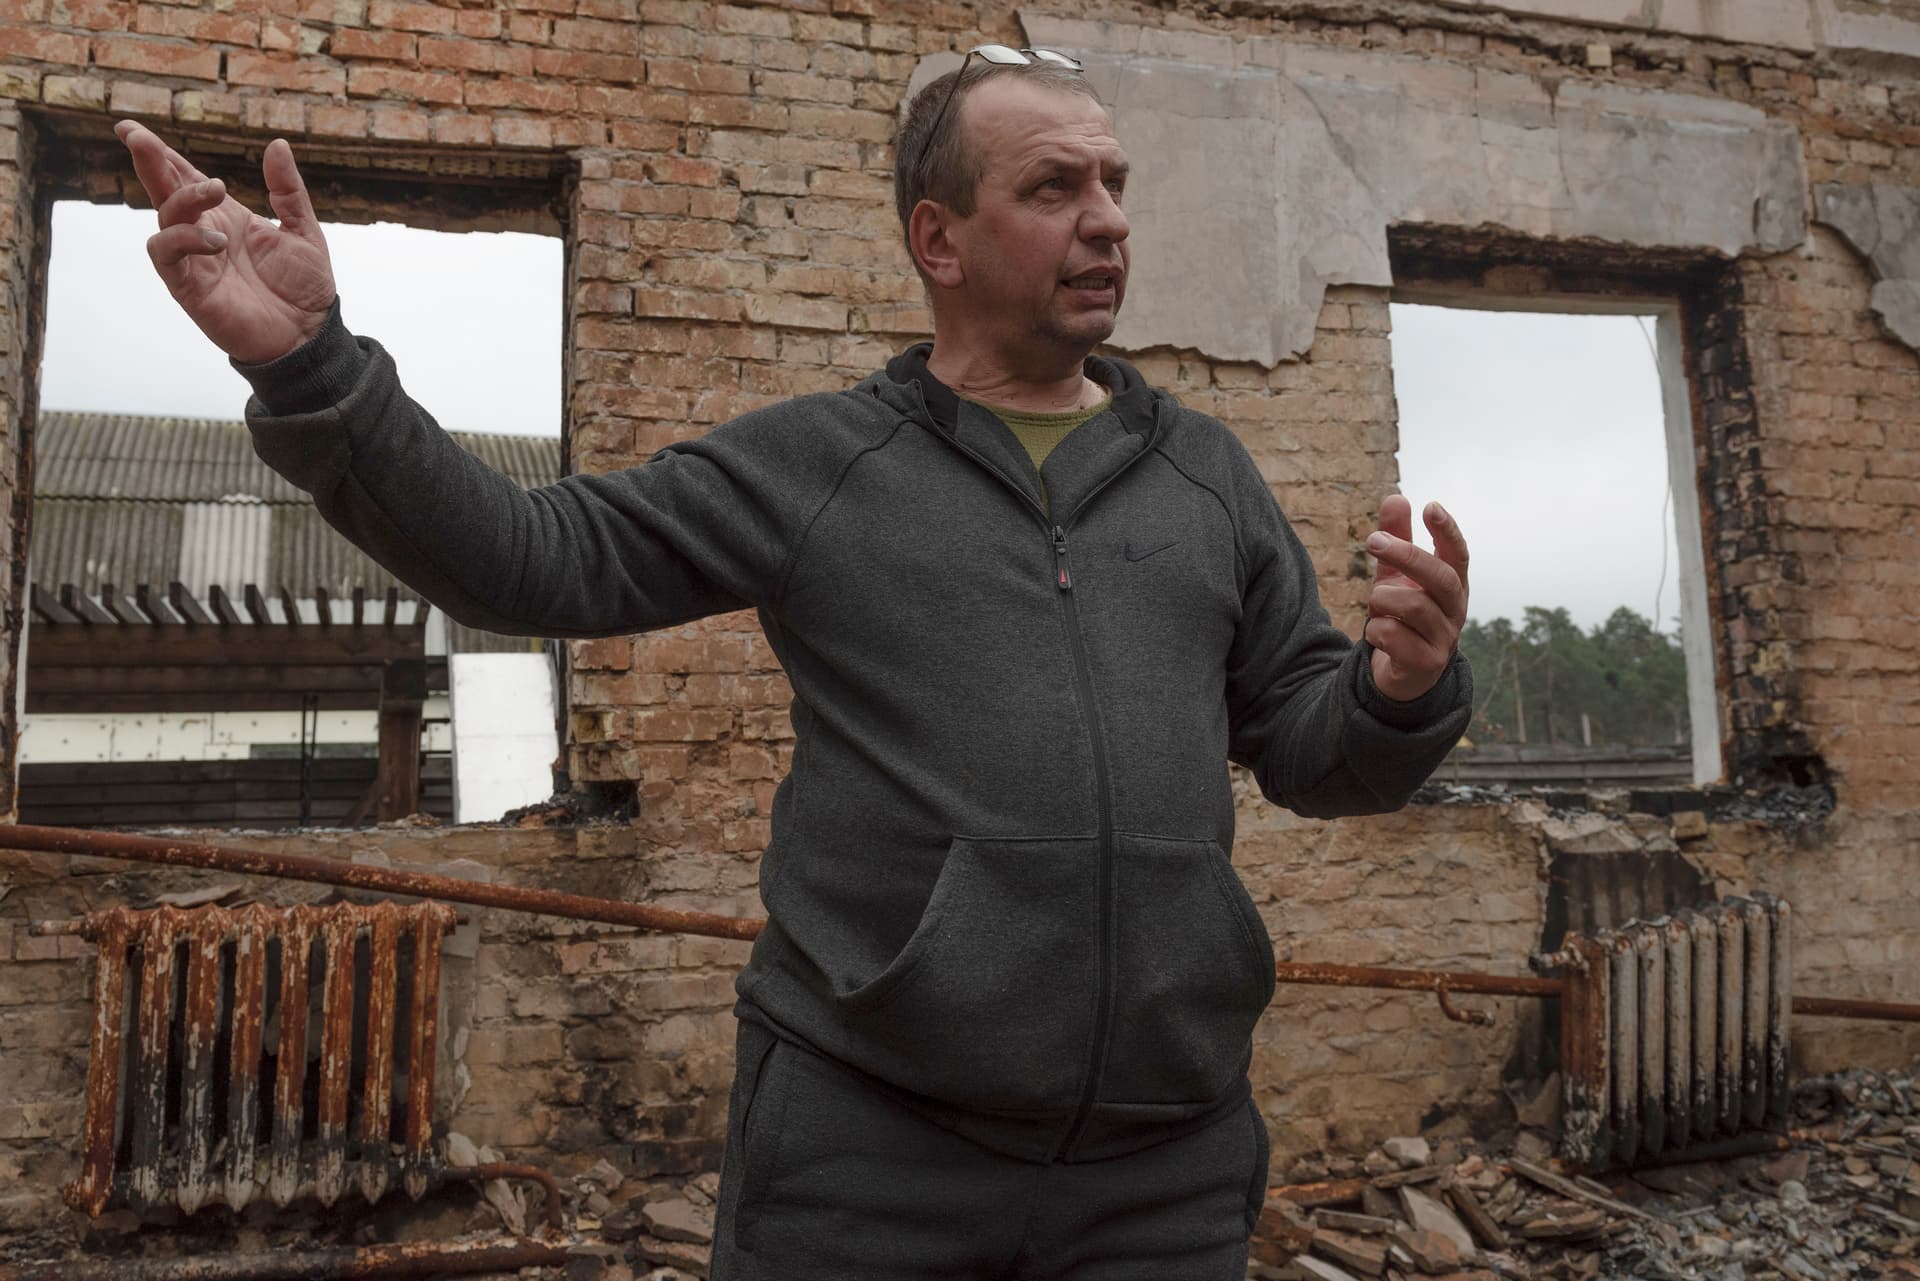 Vadym Zherdetsky talks to The Associated Press amid the wreckage of his house destroyed by fighting, in the village of Moshchun